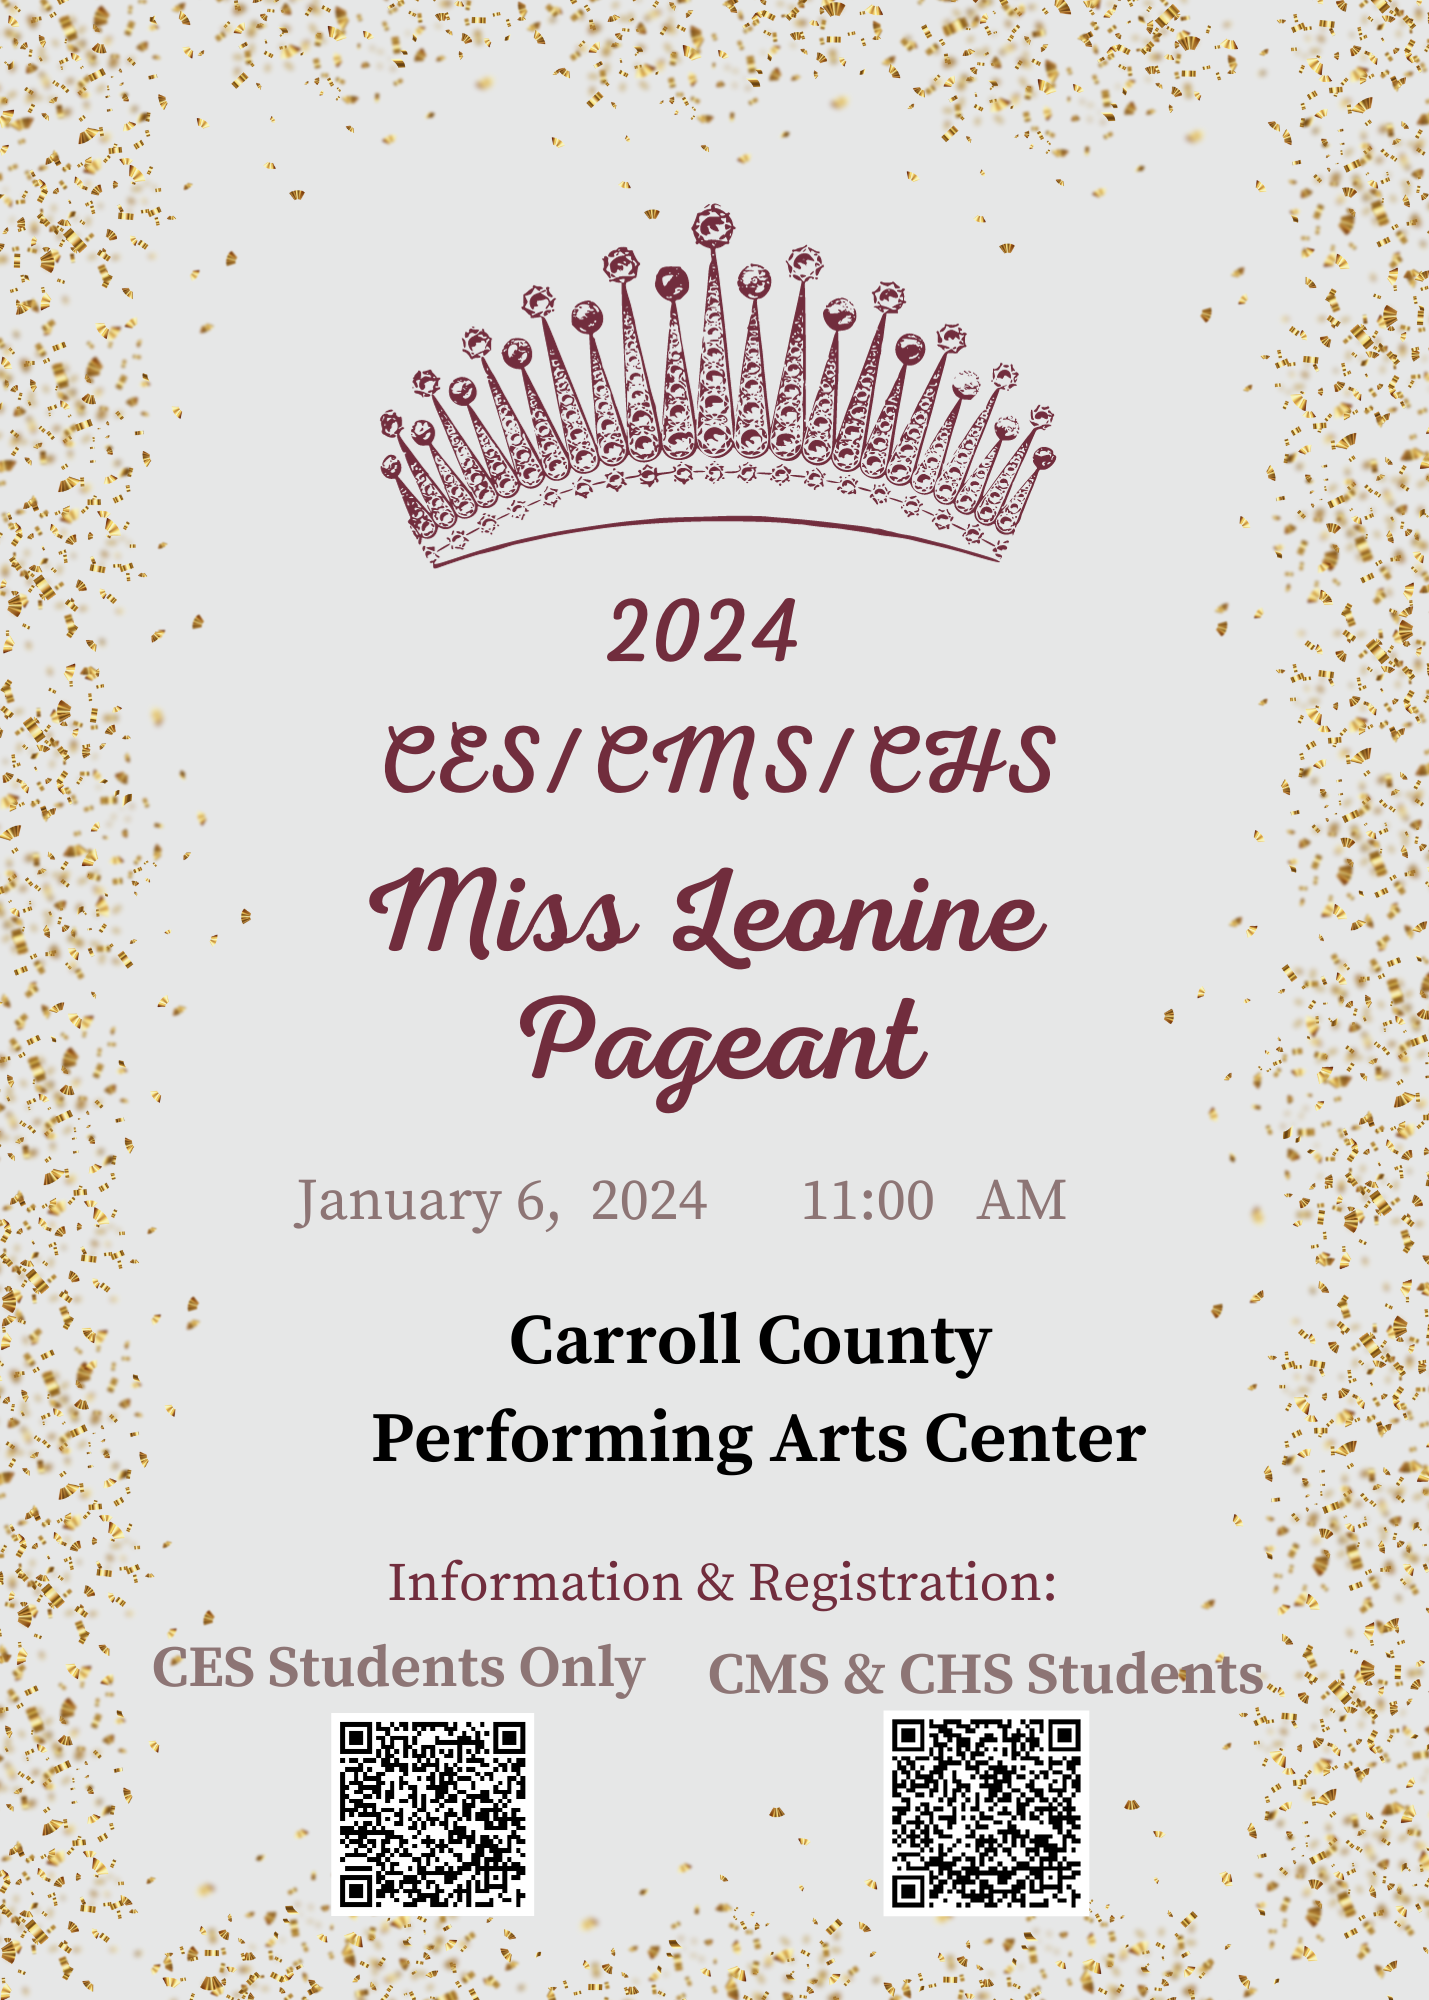 Pageant Flyer